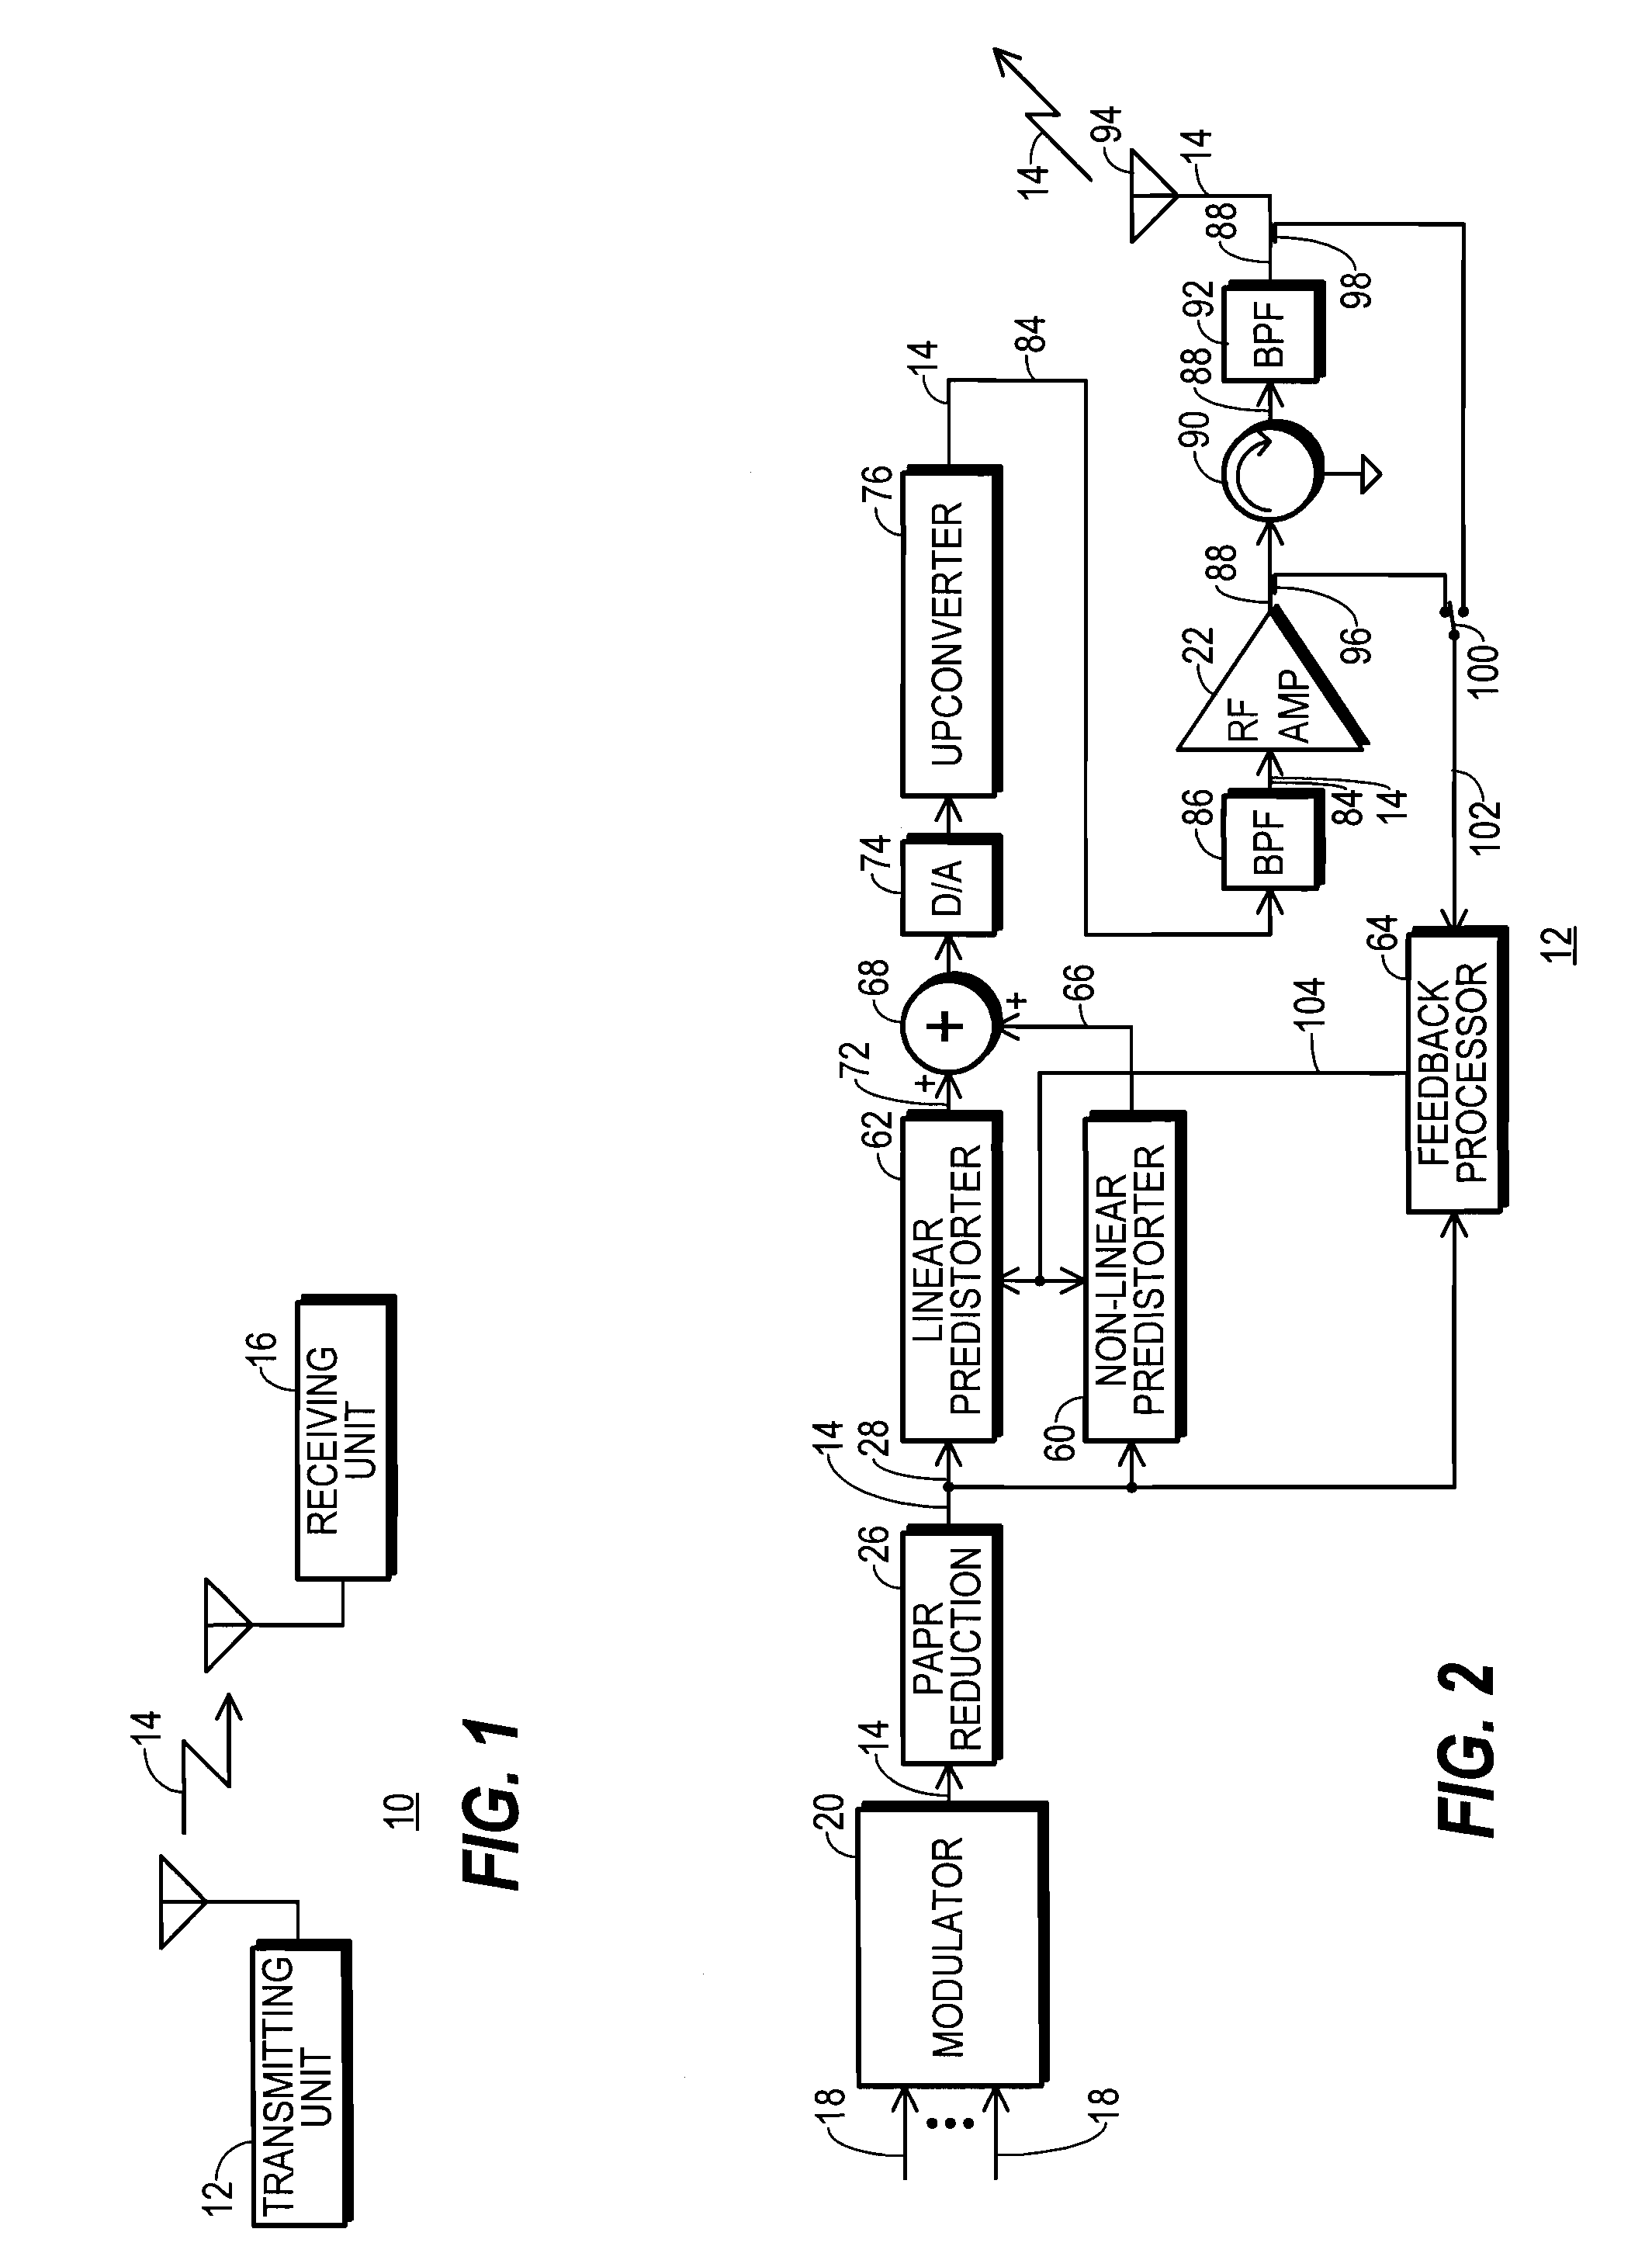 Transmitting unit that reduces PAPR using out-of-band distortion and method therefor